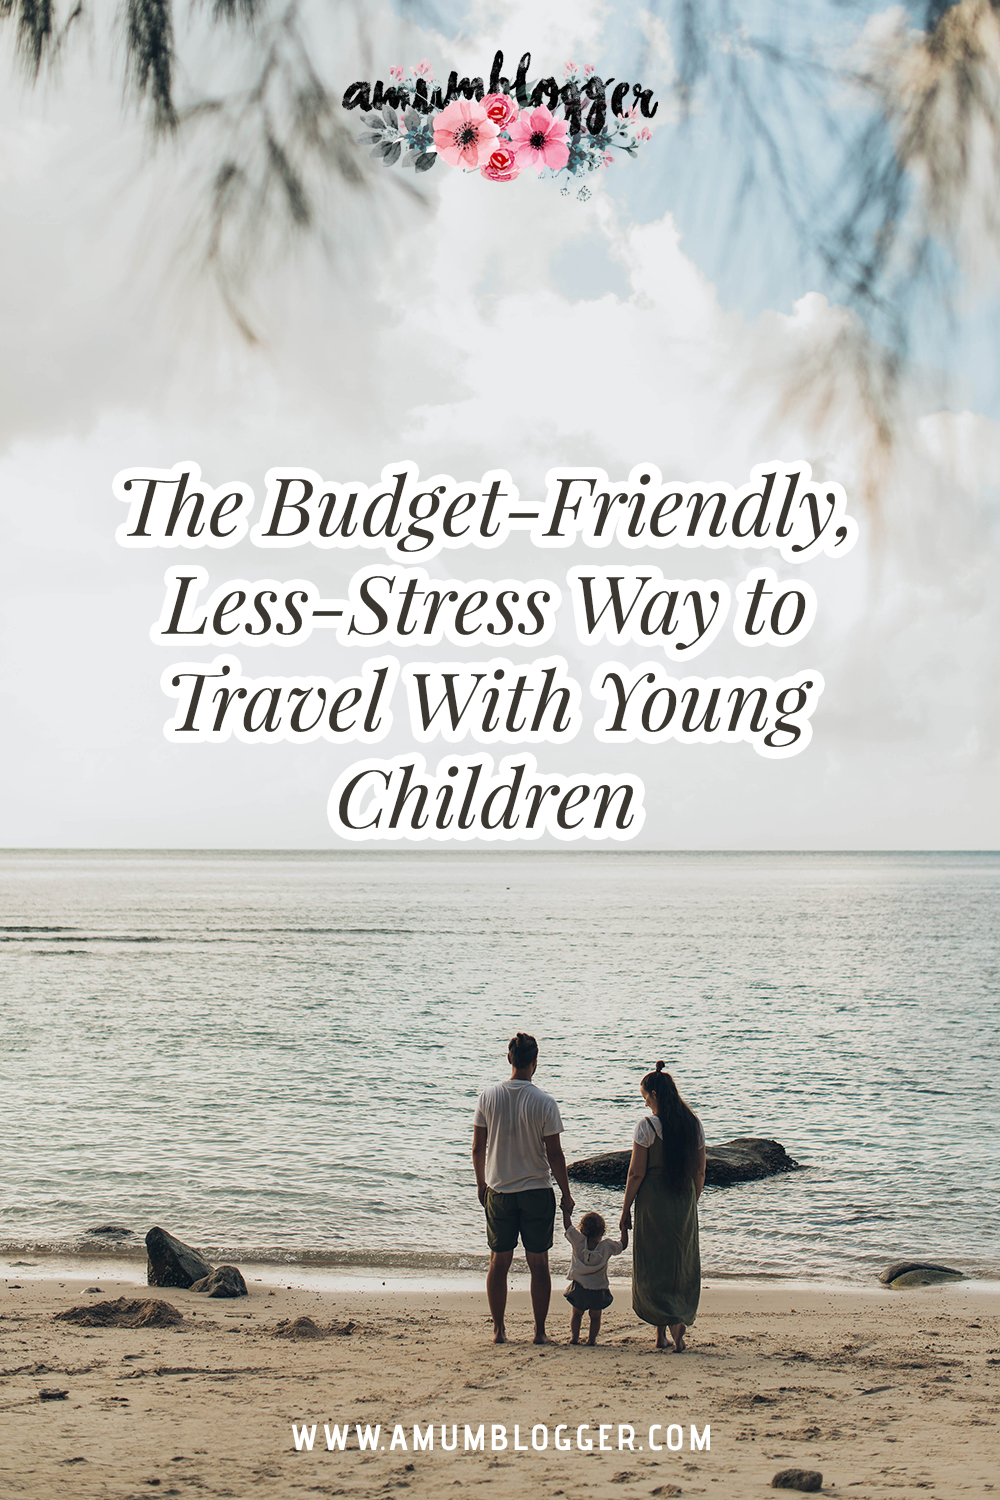 The Budget-Friendly, Less-Stress Way to Travel With Young Children